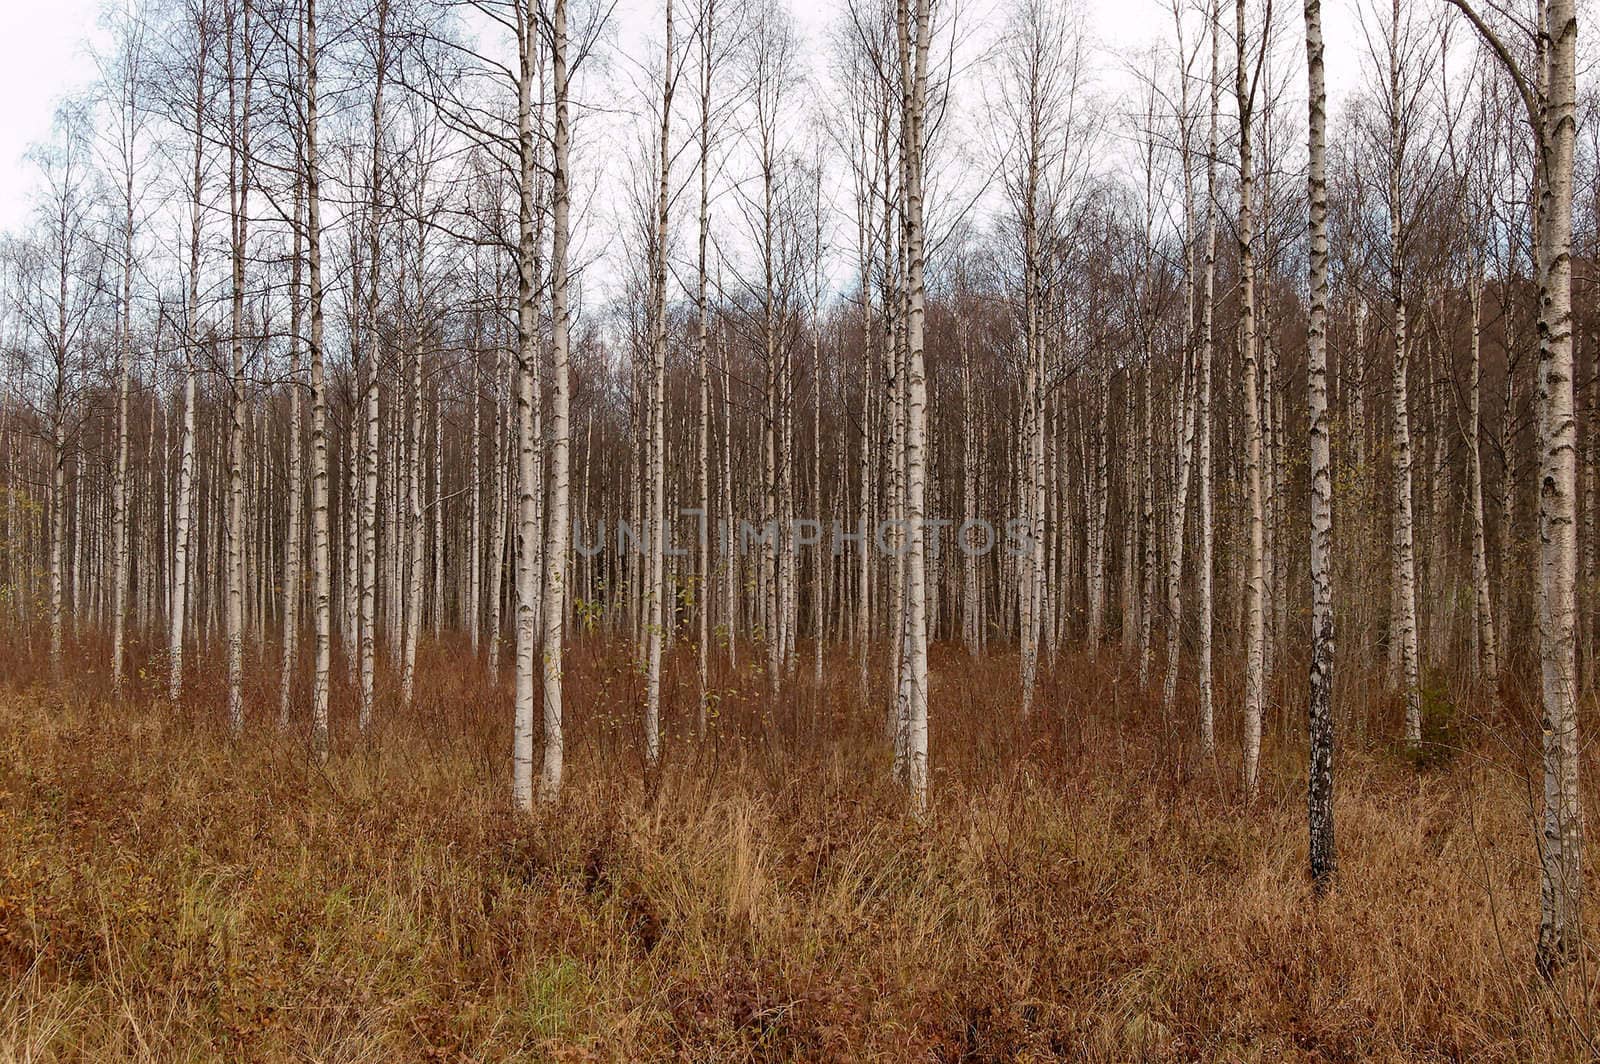 A thicket of birch trees during autumn.
